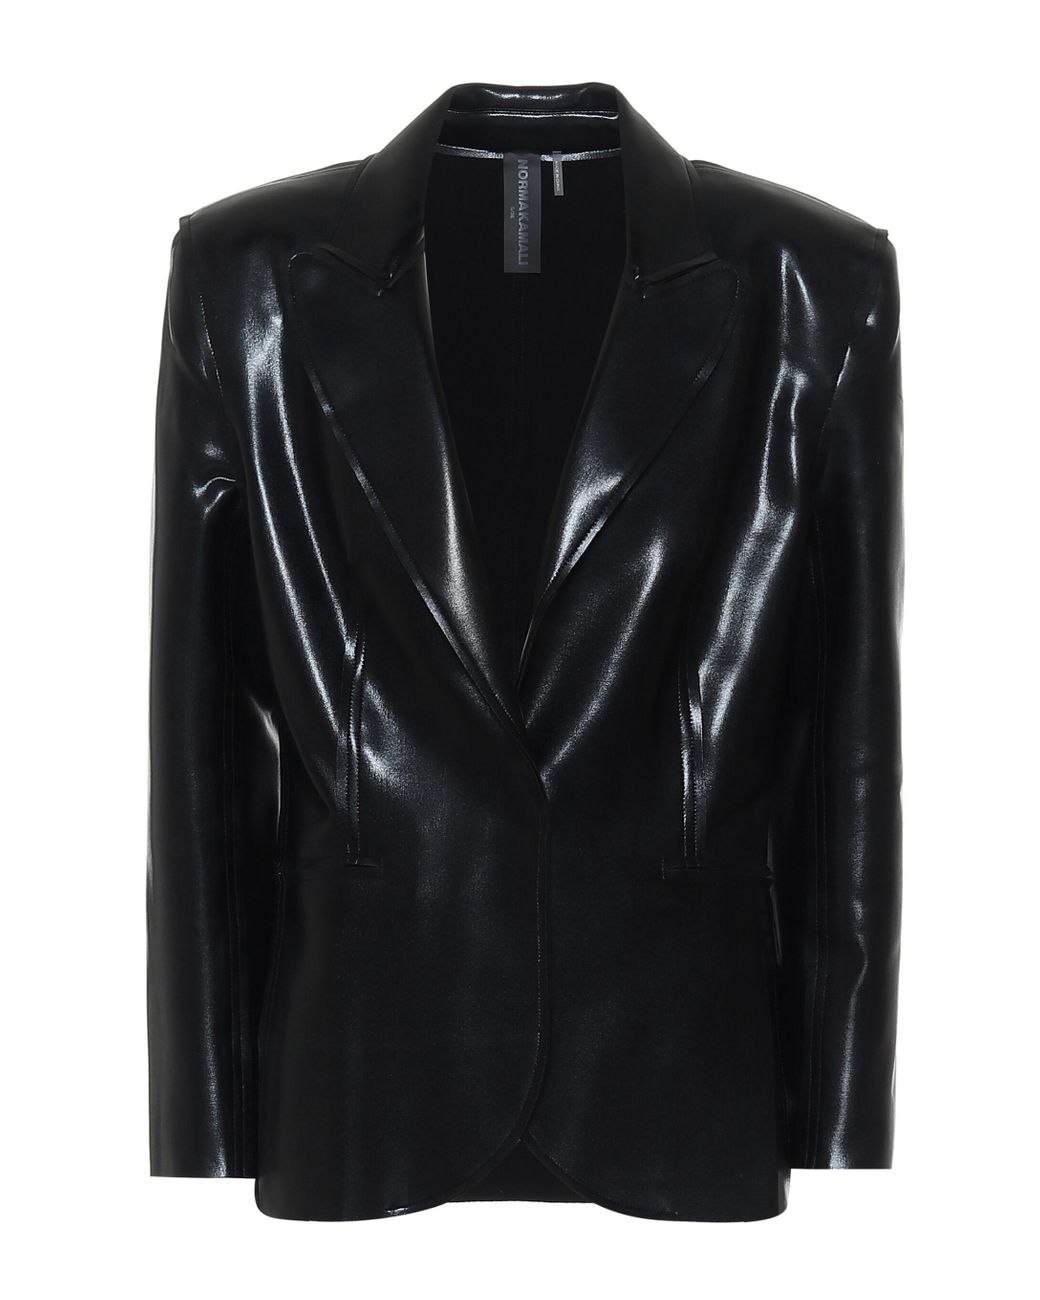 Norma Kamali Synthetic Faux-leather Blazer in Black - Lyst